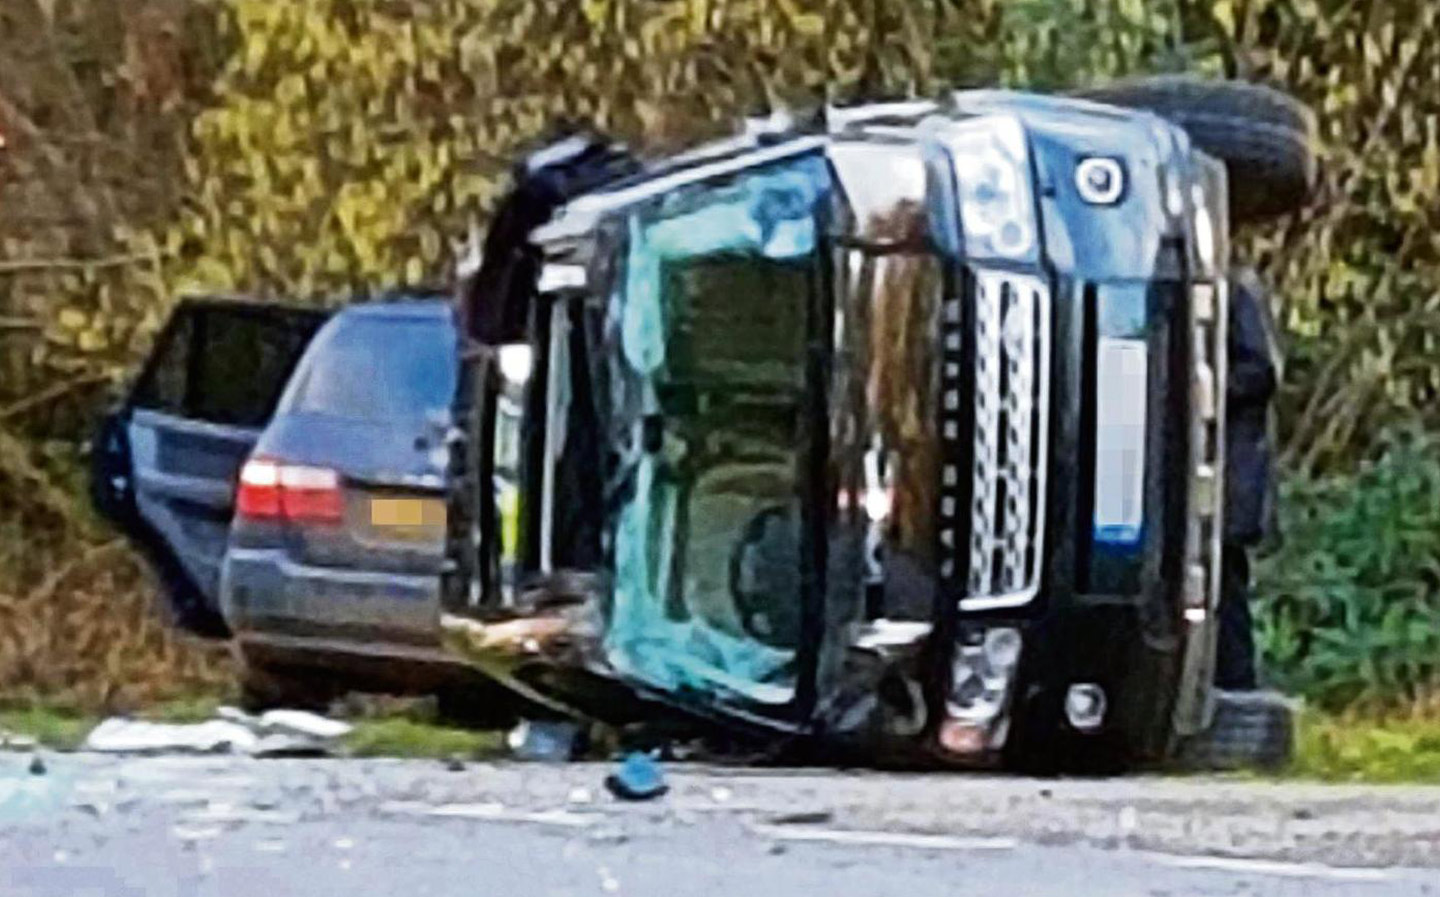 The Duke of Edinburgh’s Land Rover overturned in the collision near the Sandringham Estate. Two women in the other car were taken to hospital but later discharged THE MEGA AGENCY